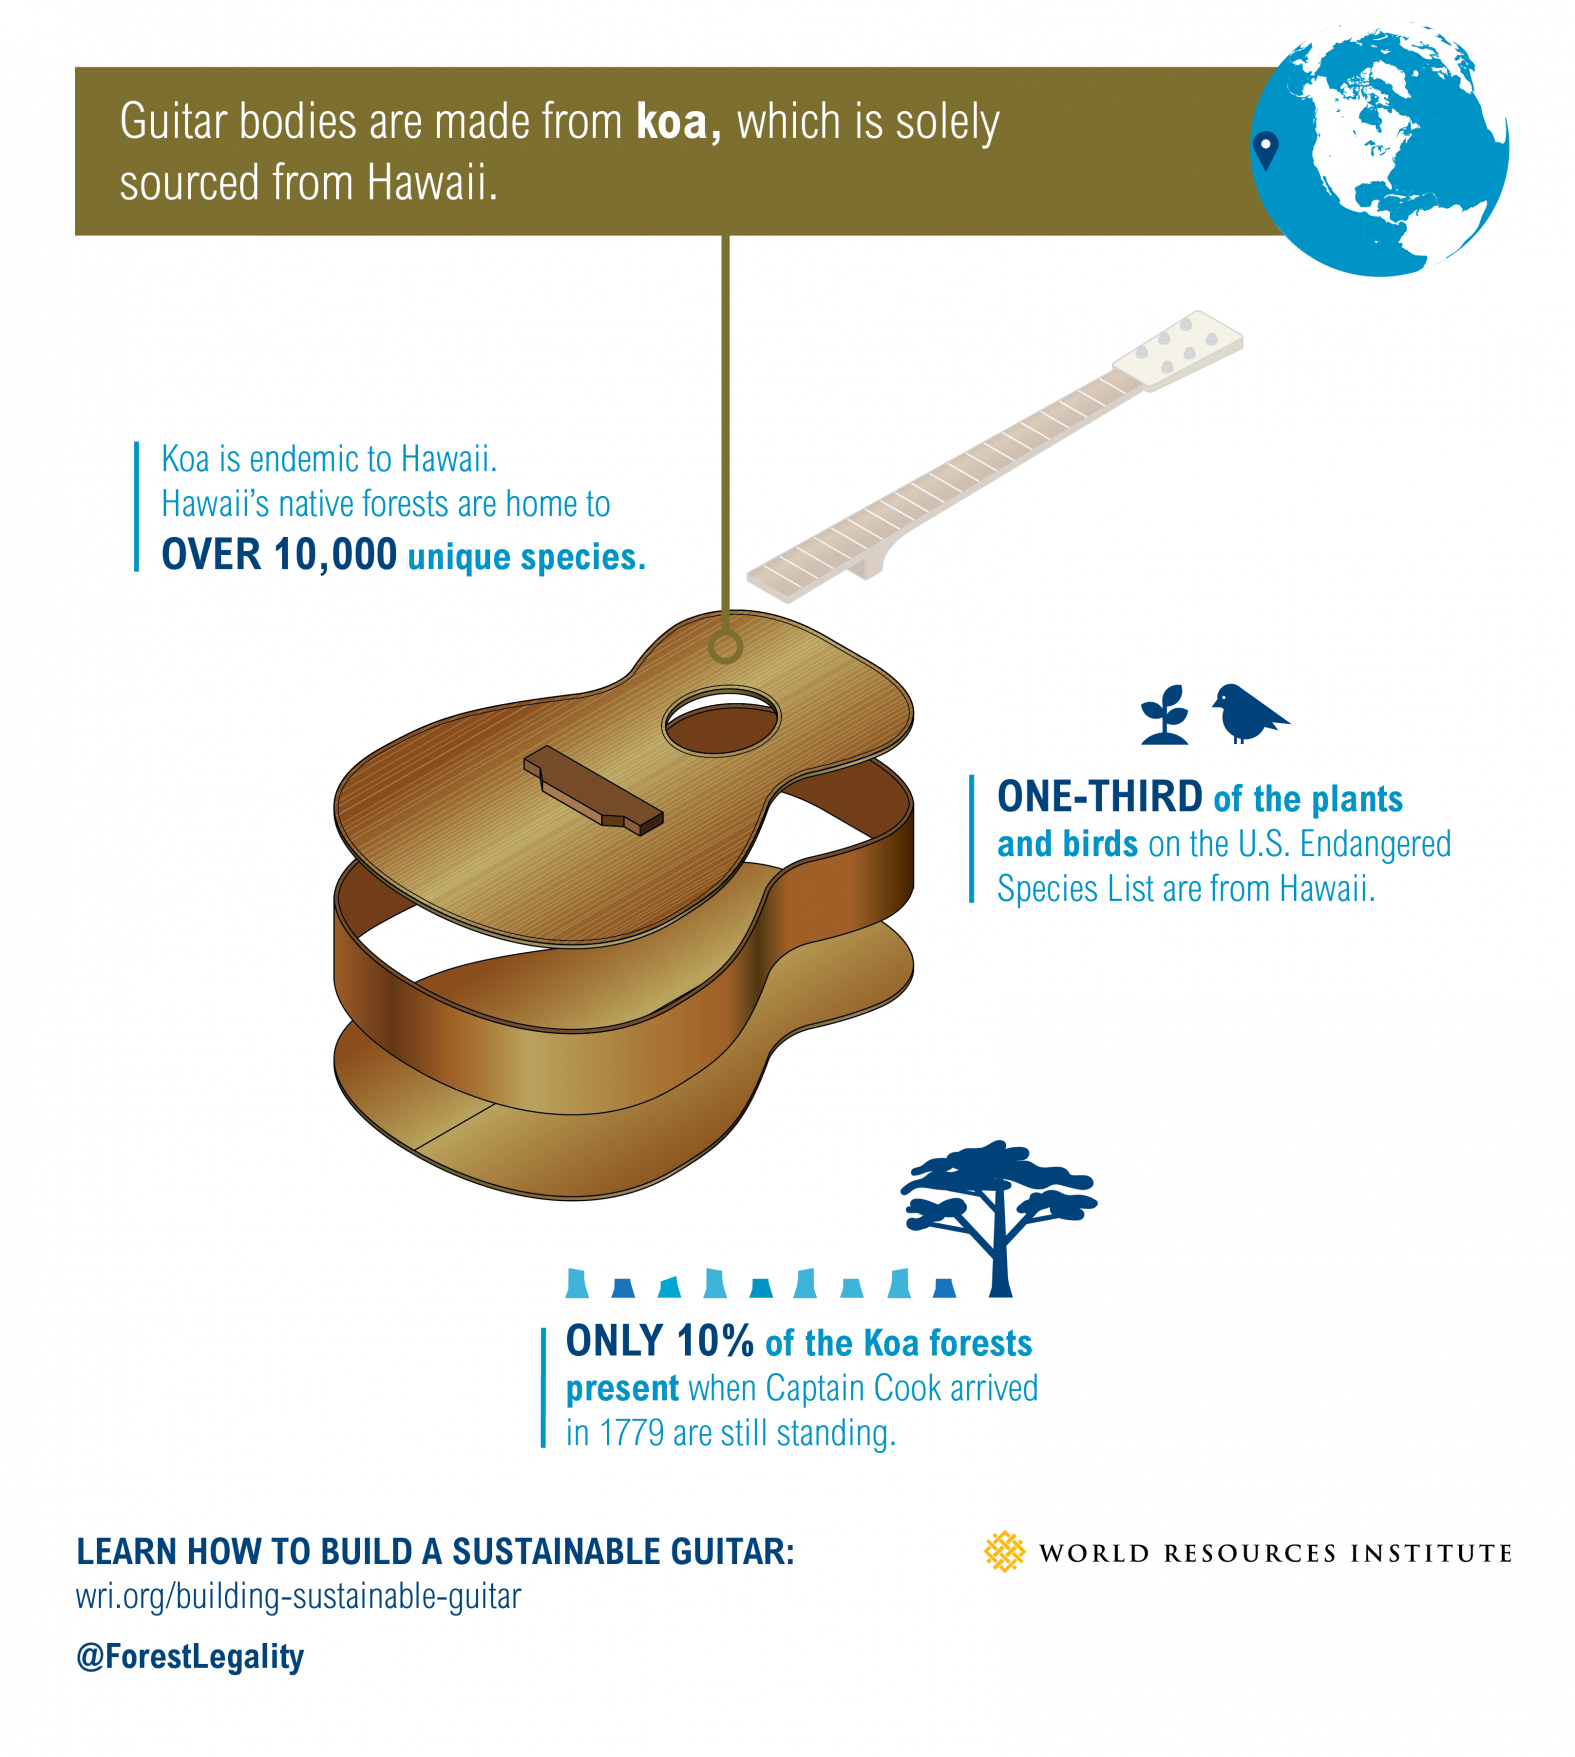 Learn how to build a sustainable guitar